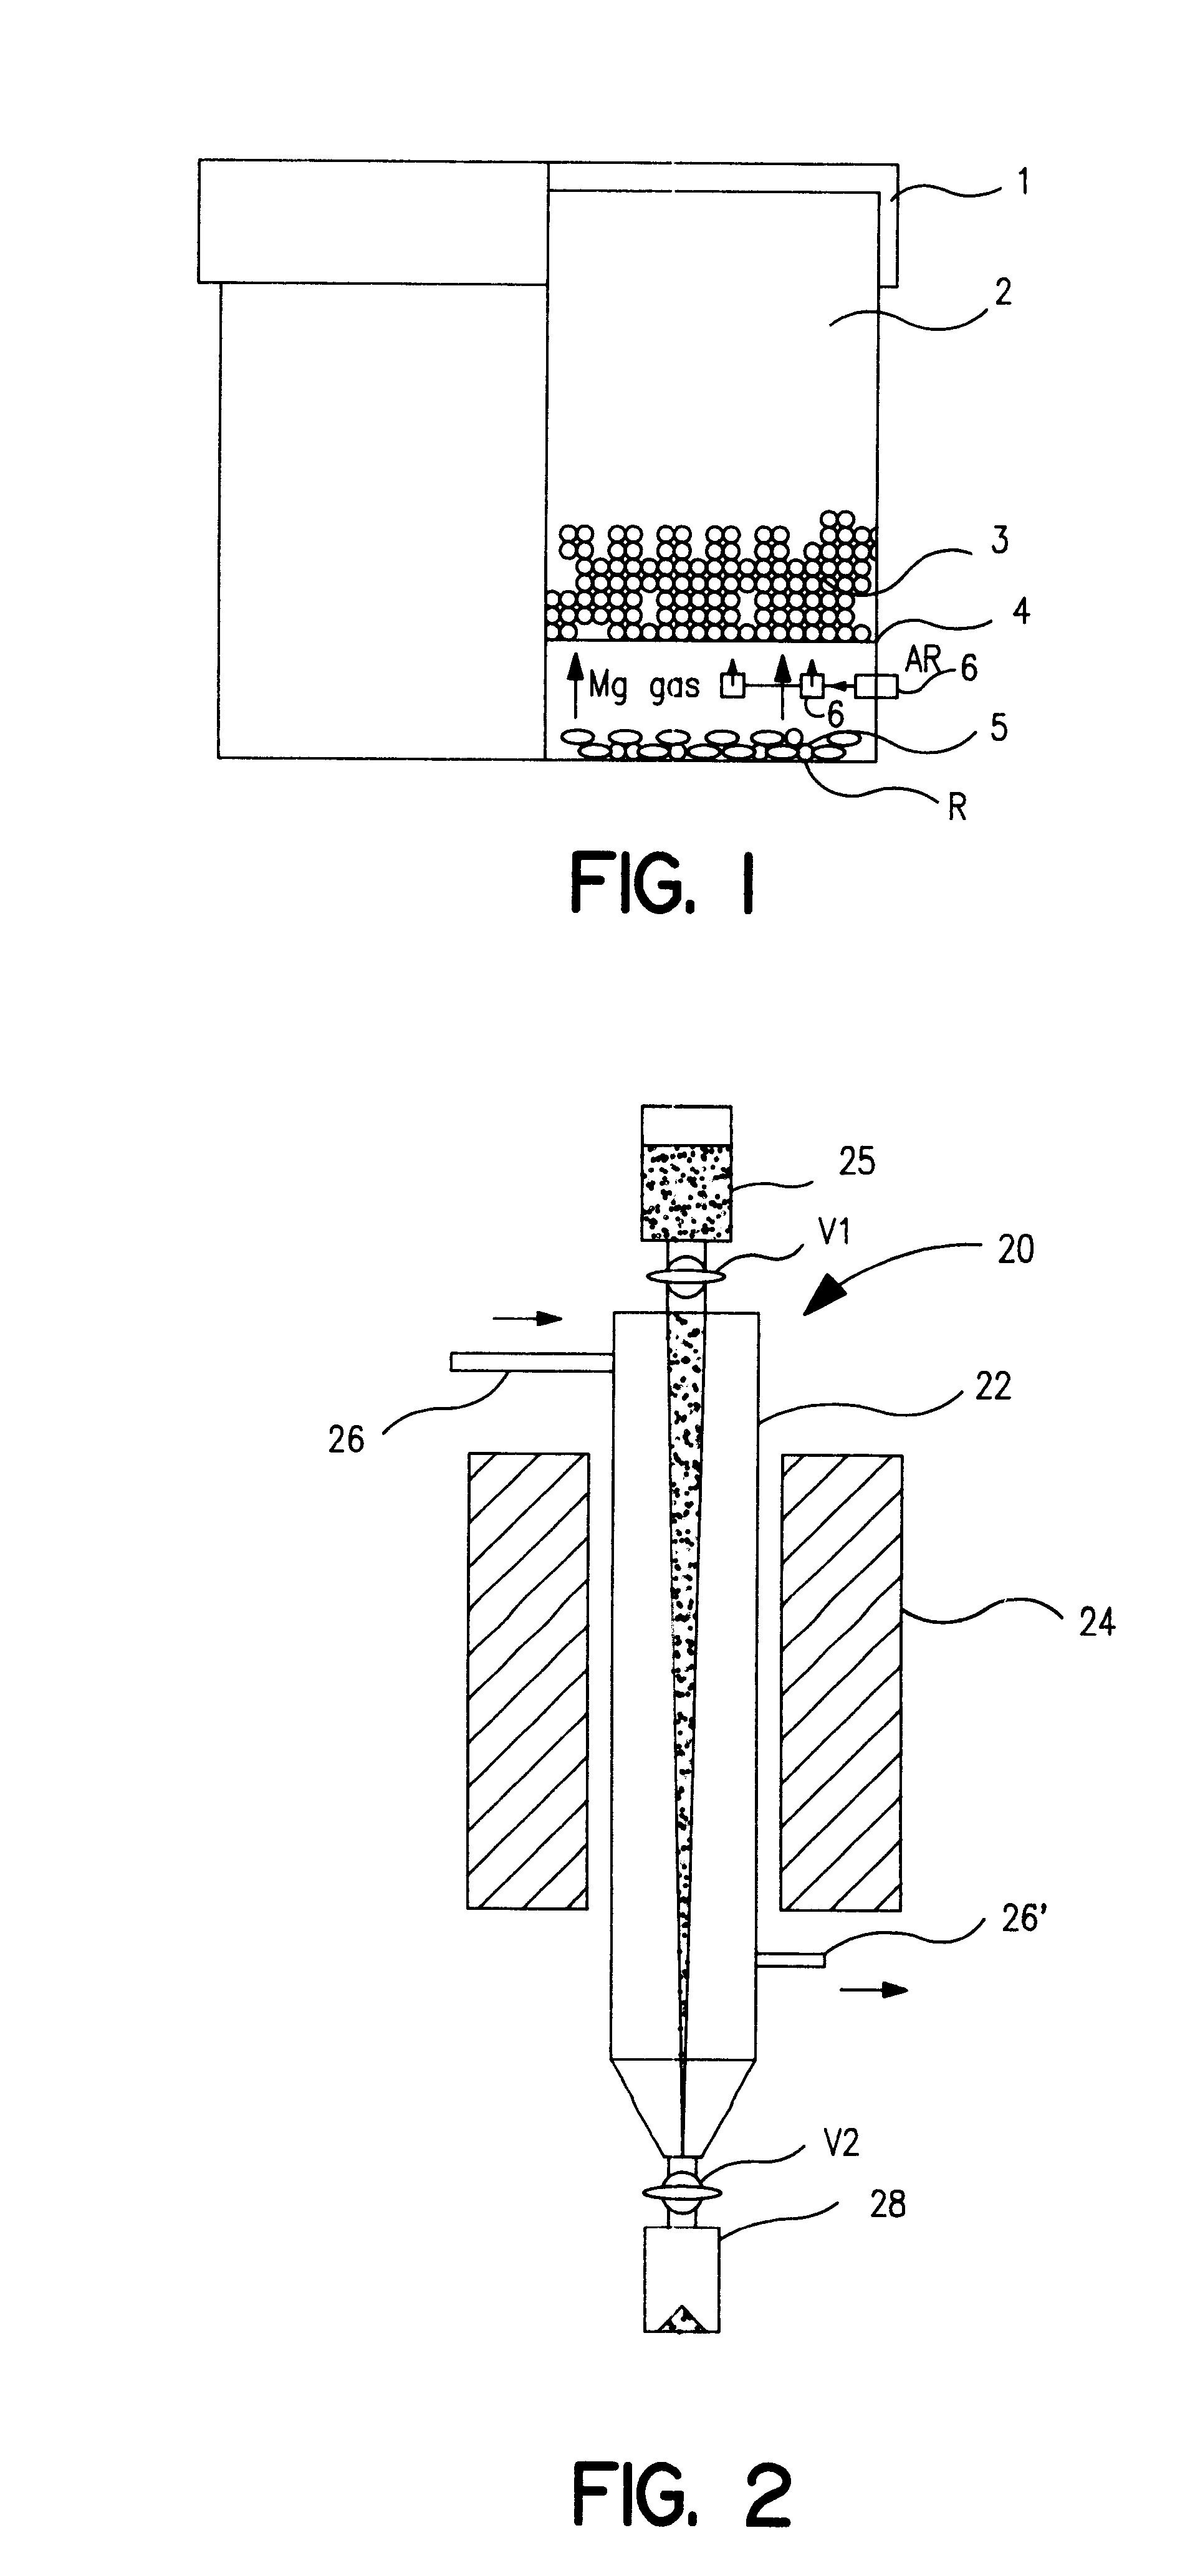 Method for producing tantallum/niobium metal powders by the reduction of their oxides with gaseous magnesium